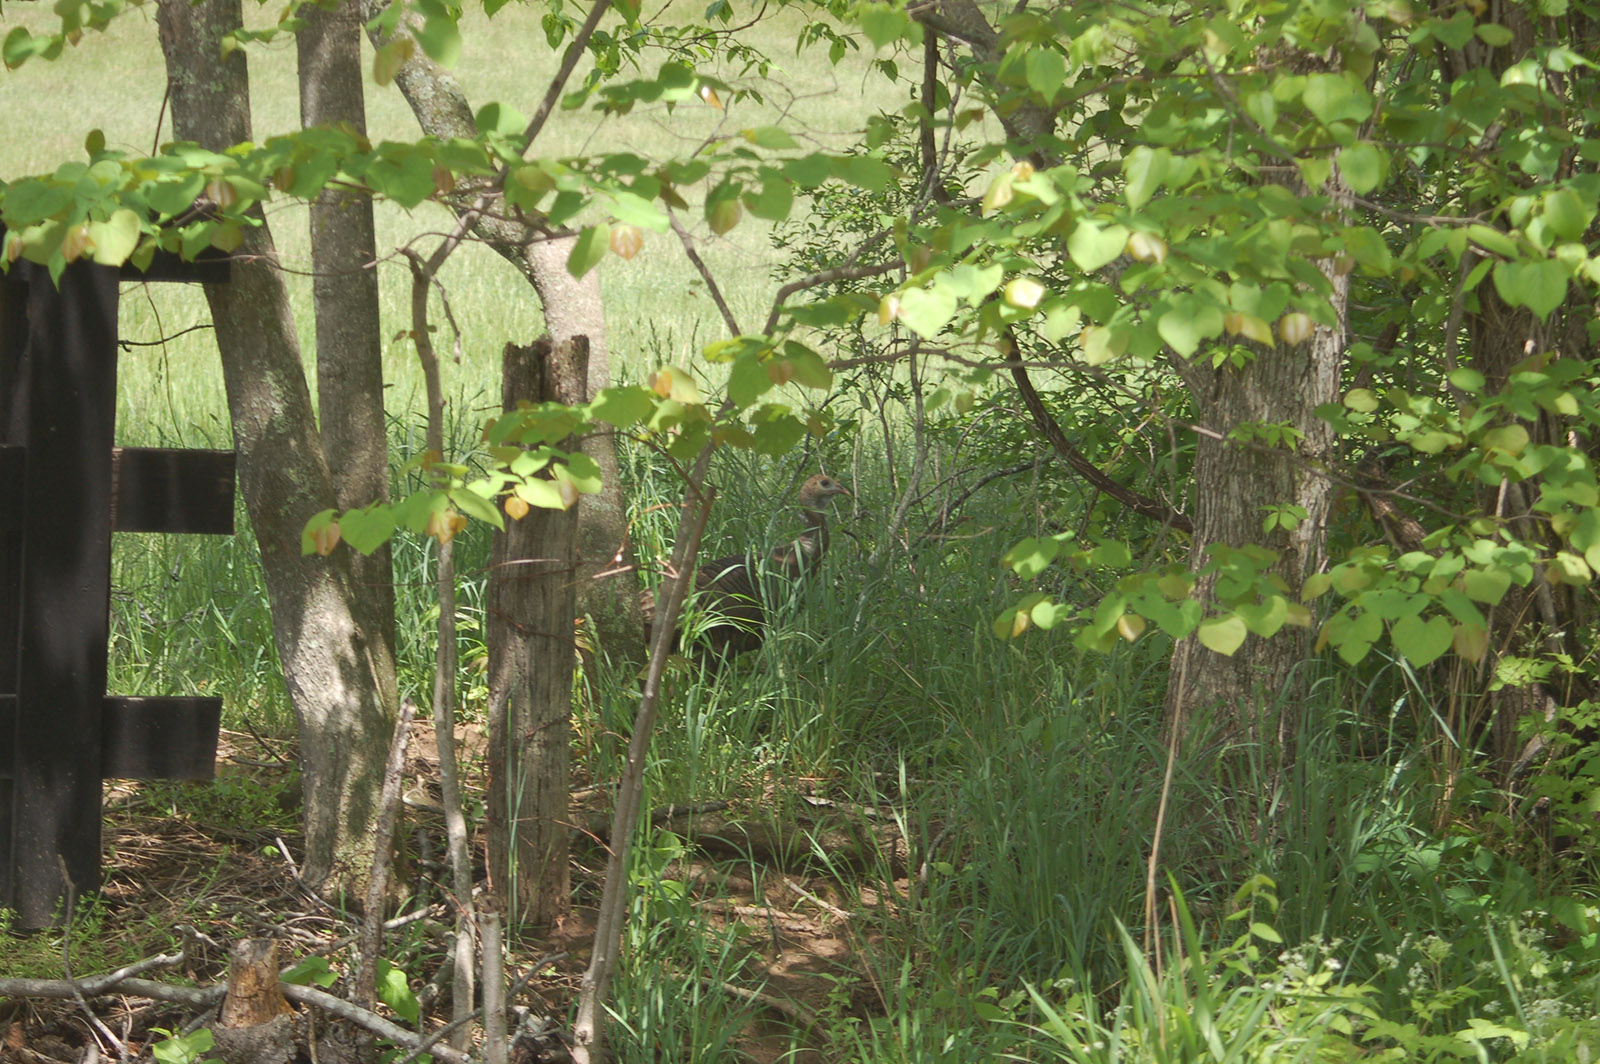 A photo of a barely visible turkey hen hidden among tall grasses and shrubs.